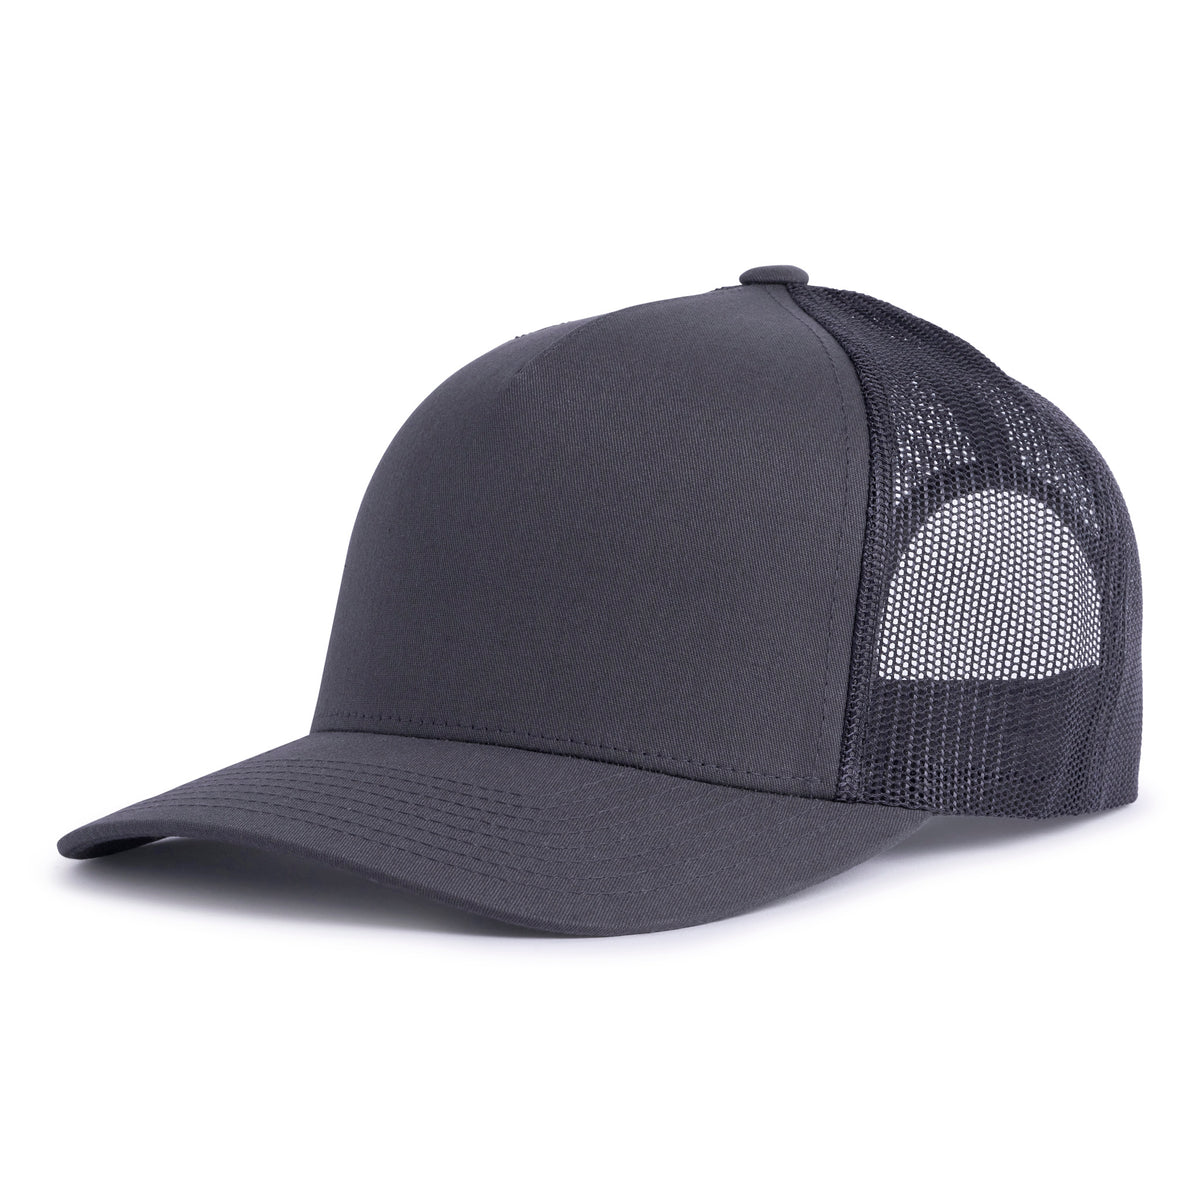 Charcoal grey trucker hat with a curved bill, 5-panels, structured mid-high crown, black mesh back, and a snapback closure from Tailgate Hats.